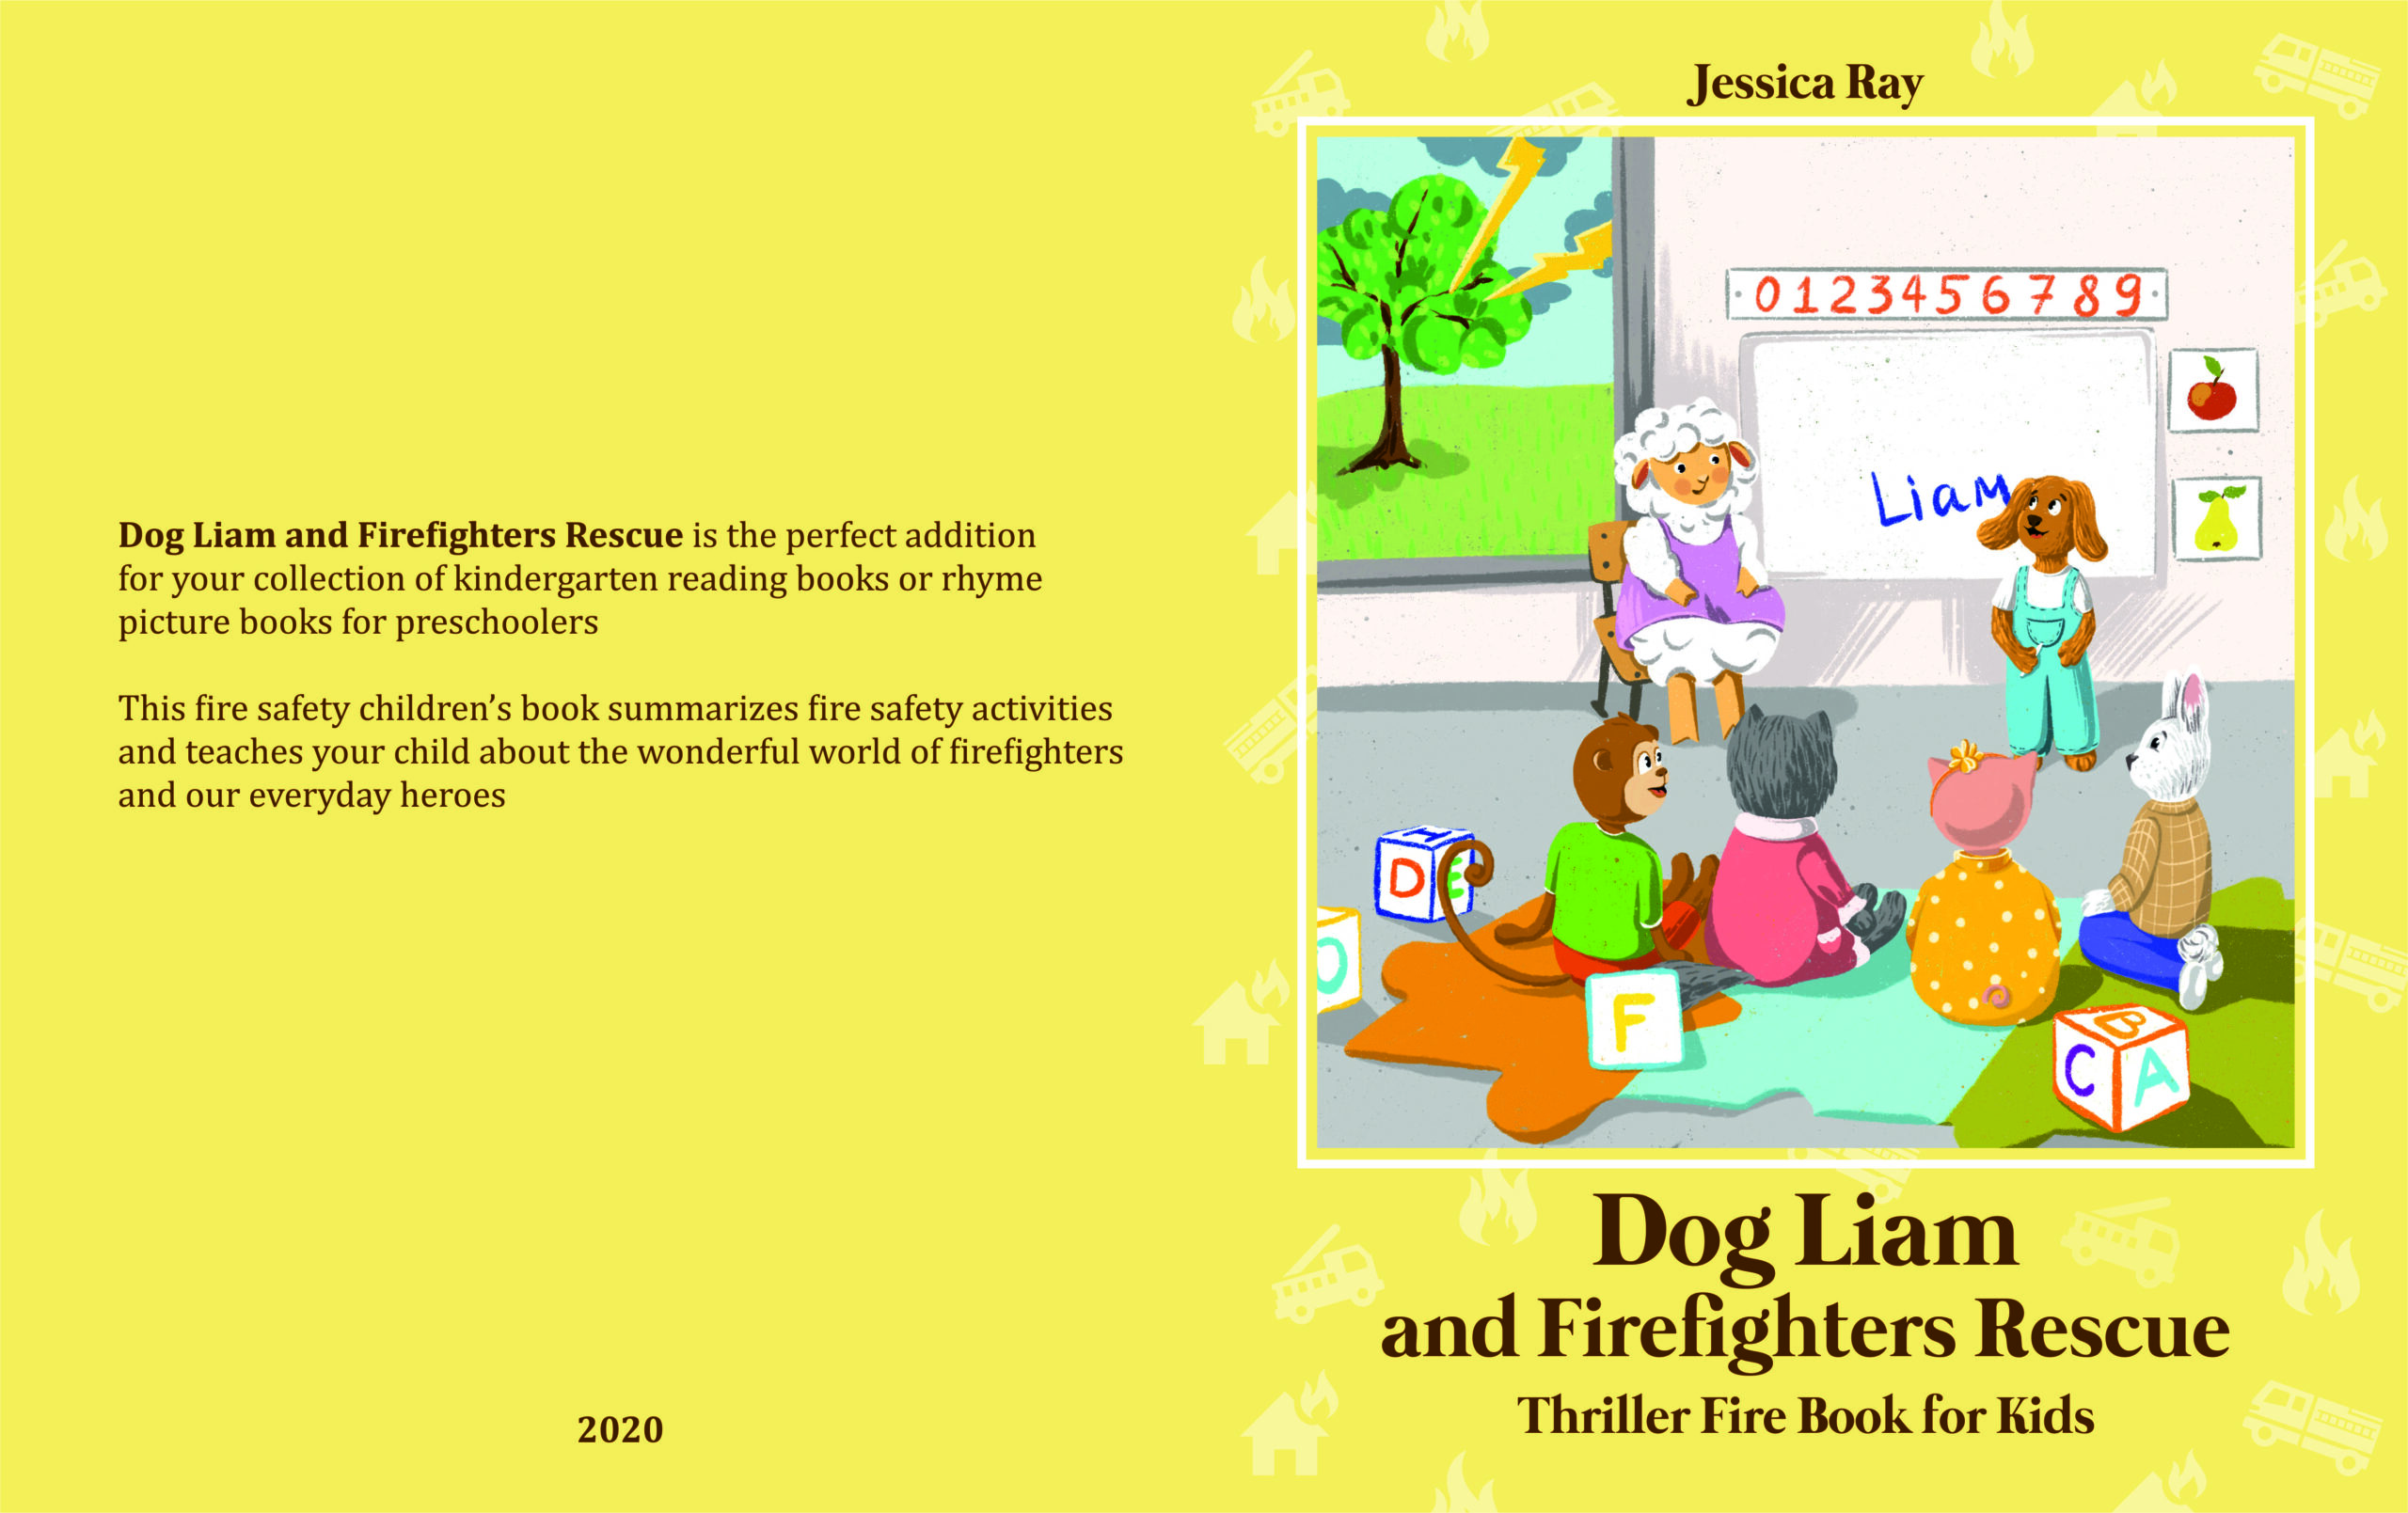 FREE: Dog Liam and Firefighters Rescue: Thriller Fire Book for Kids by Jessica Ray